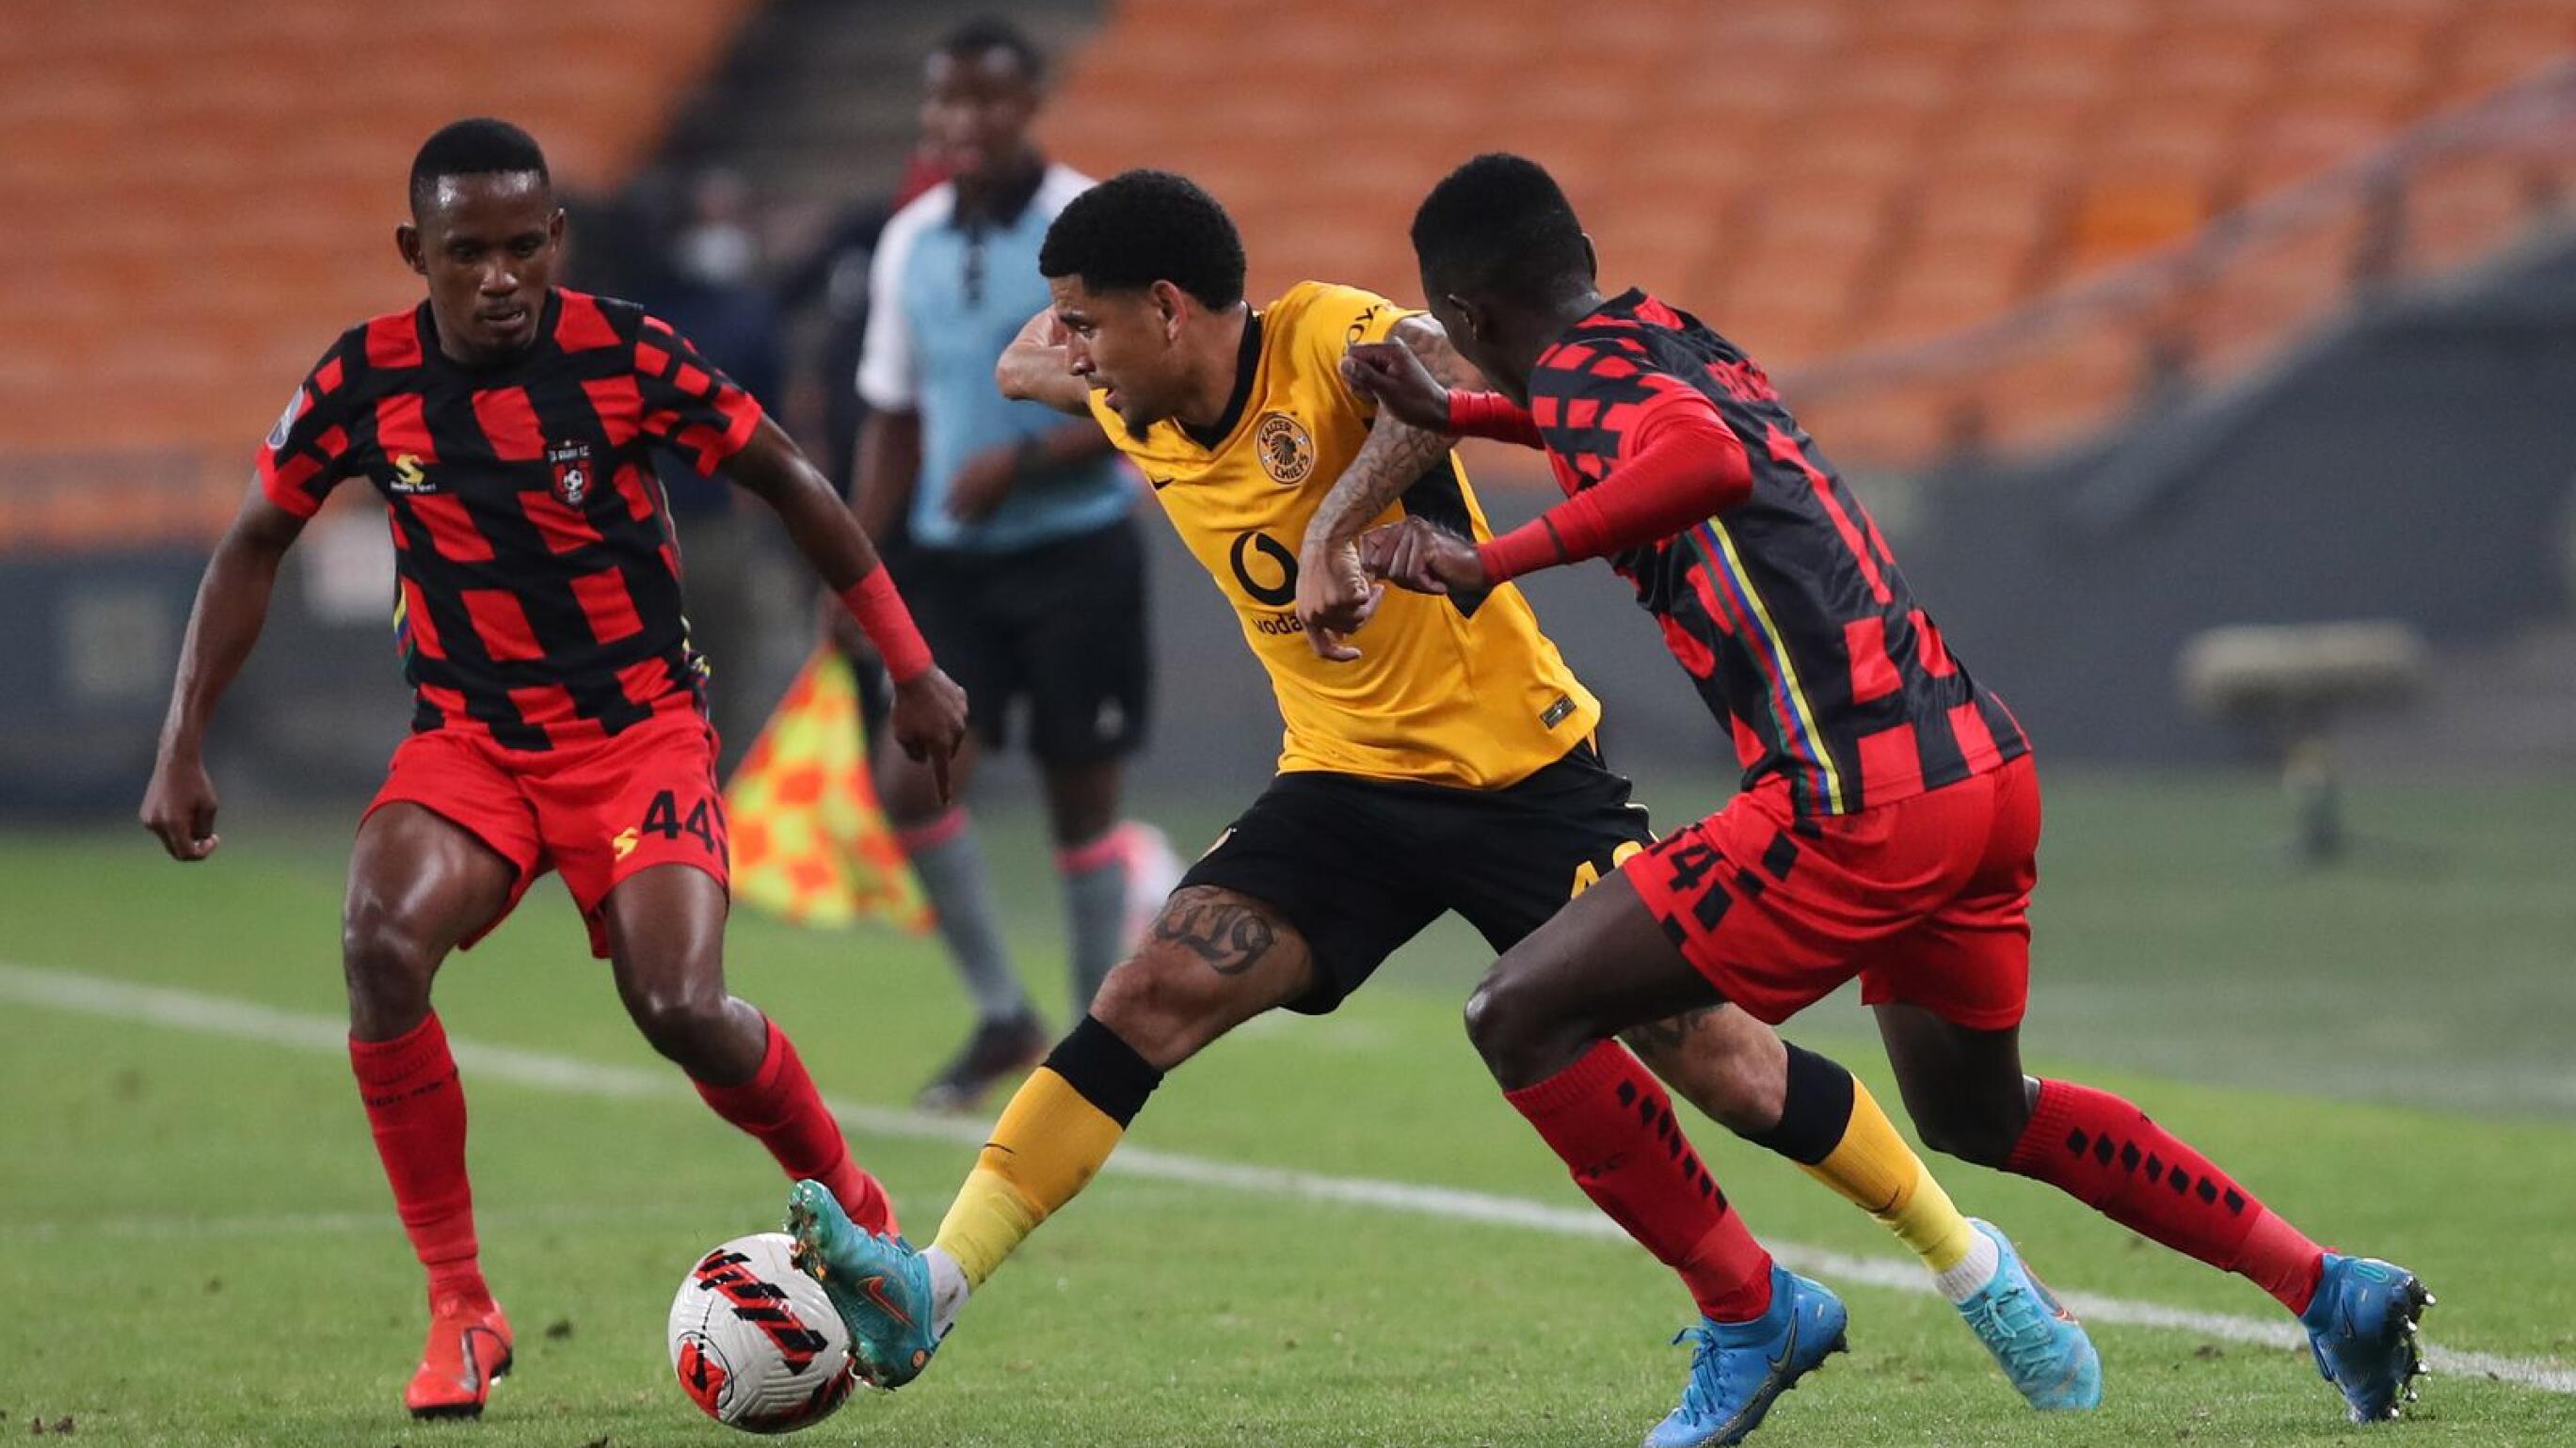 Keagan Dolly of Kaizer Chiefs is challenged by Orebotse Mongae of TS Galaxy during their DStv Premiership match at FNB Stadium in Johannesburg on Tuesday